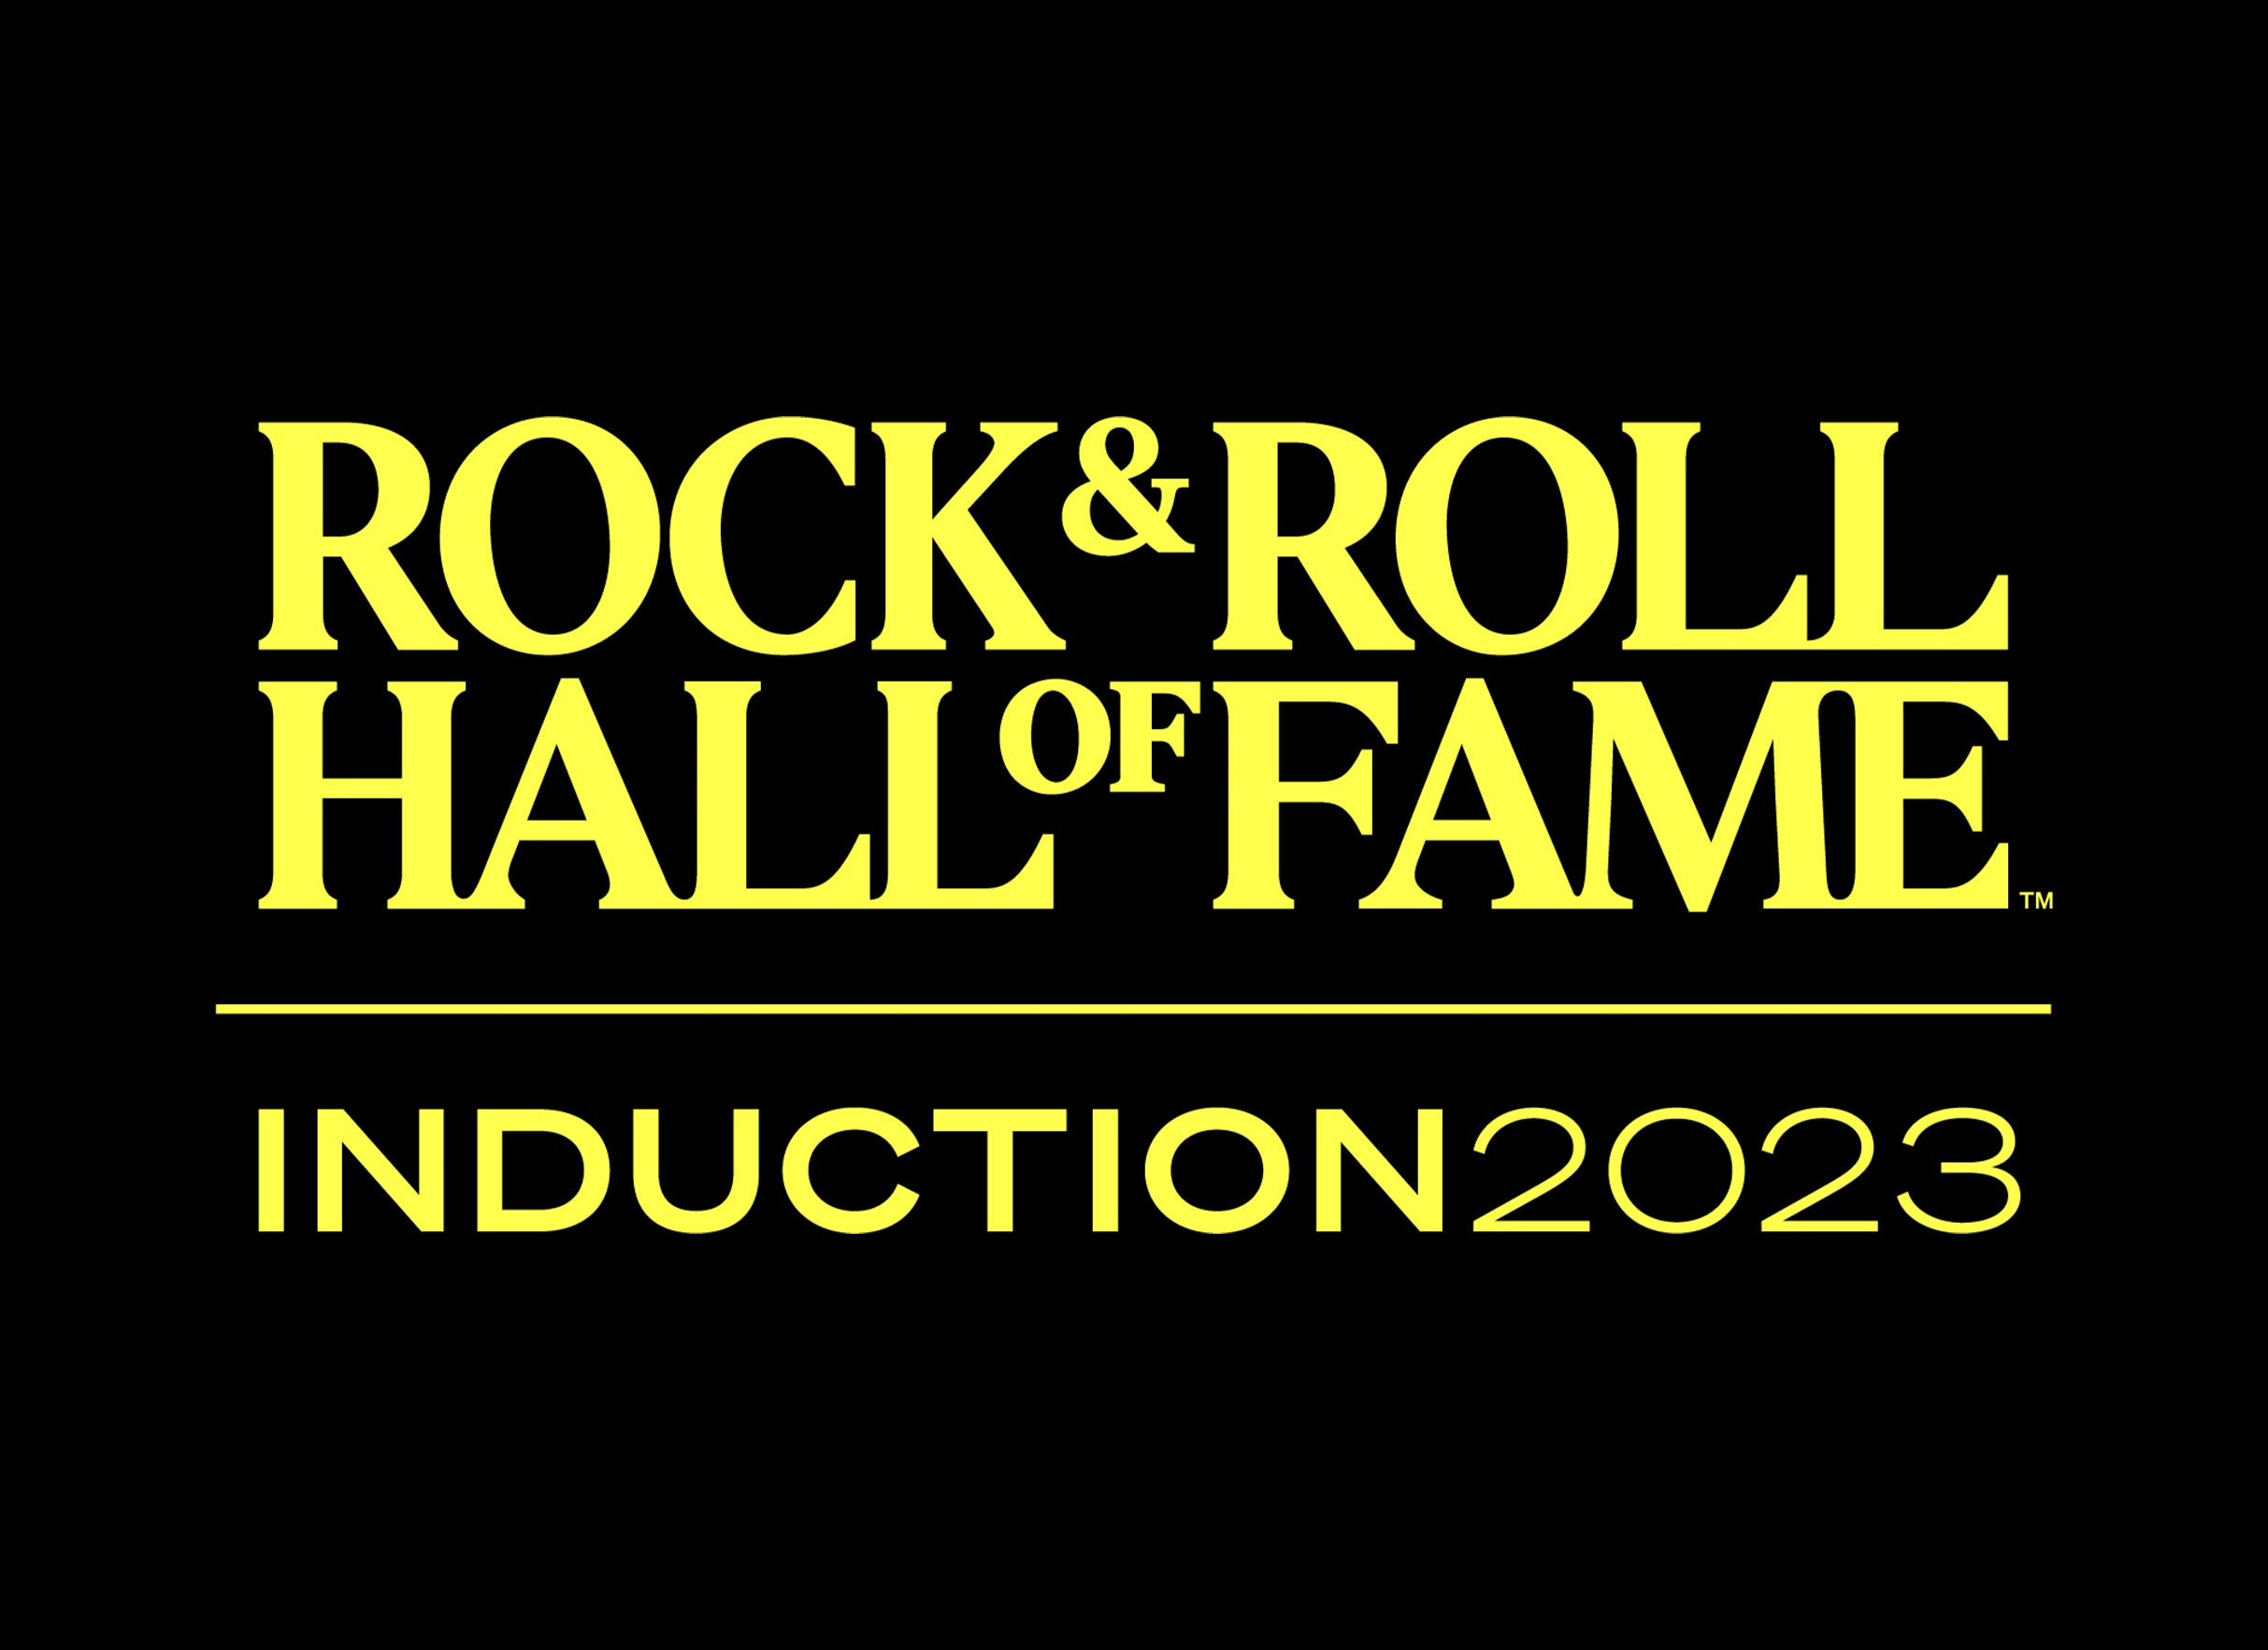 38th Annual Rock & Roll Hall of Fame Induction Ceremony in Brooklyn promo photo for Official Platinum  presale offer code